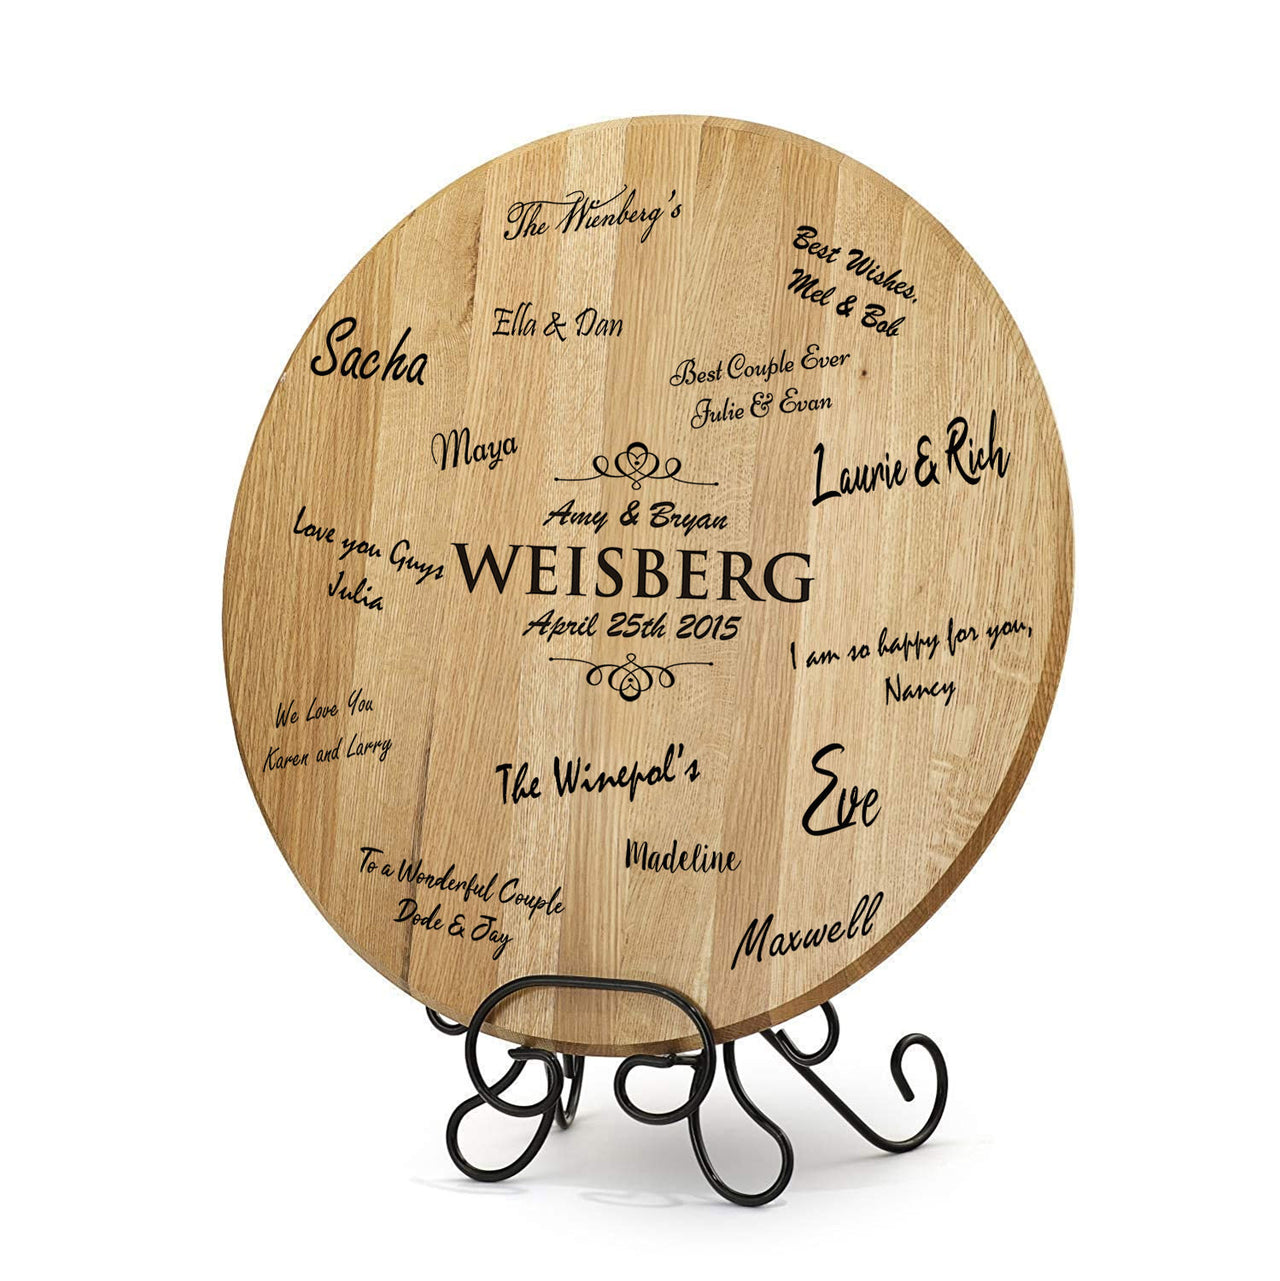 Wedding | Barrel Head Sign | Iron Stand | Unique Guest Book | Personalize It!